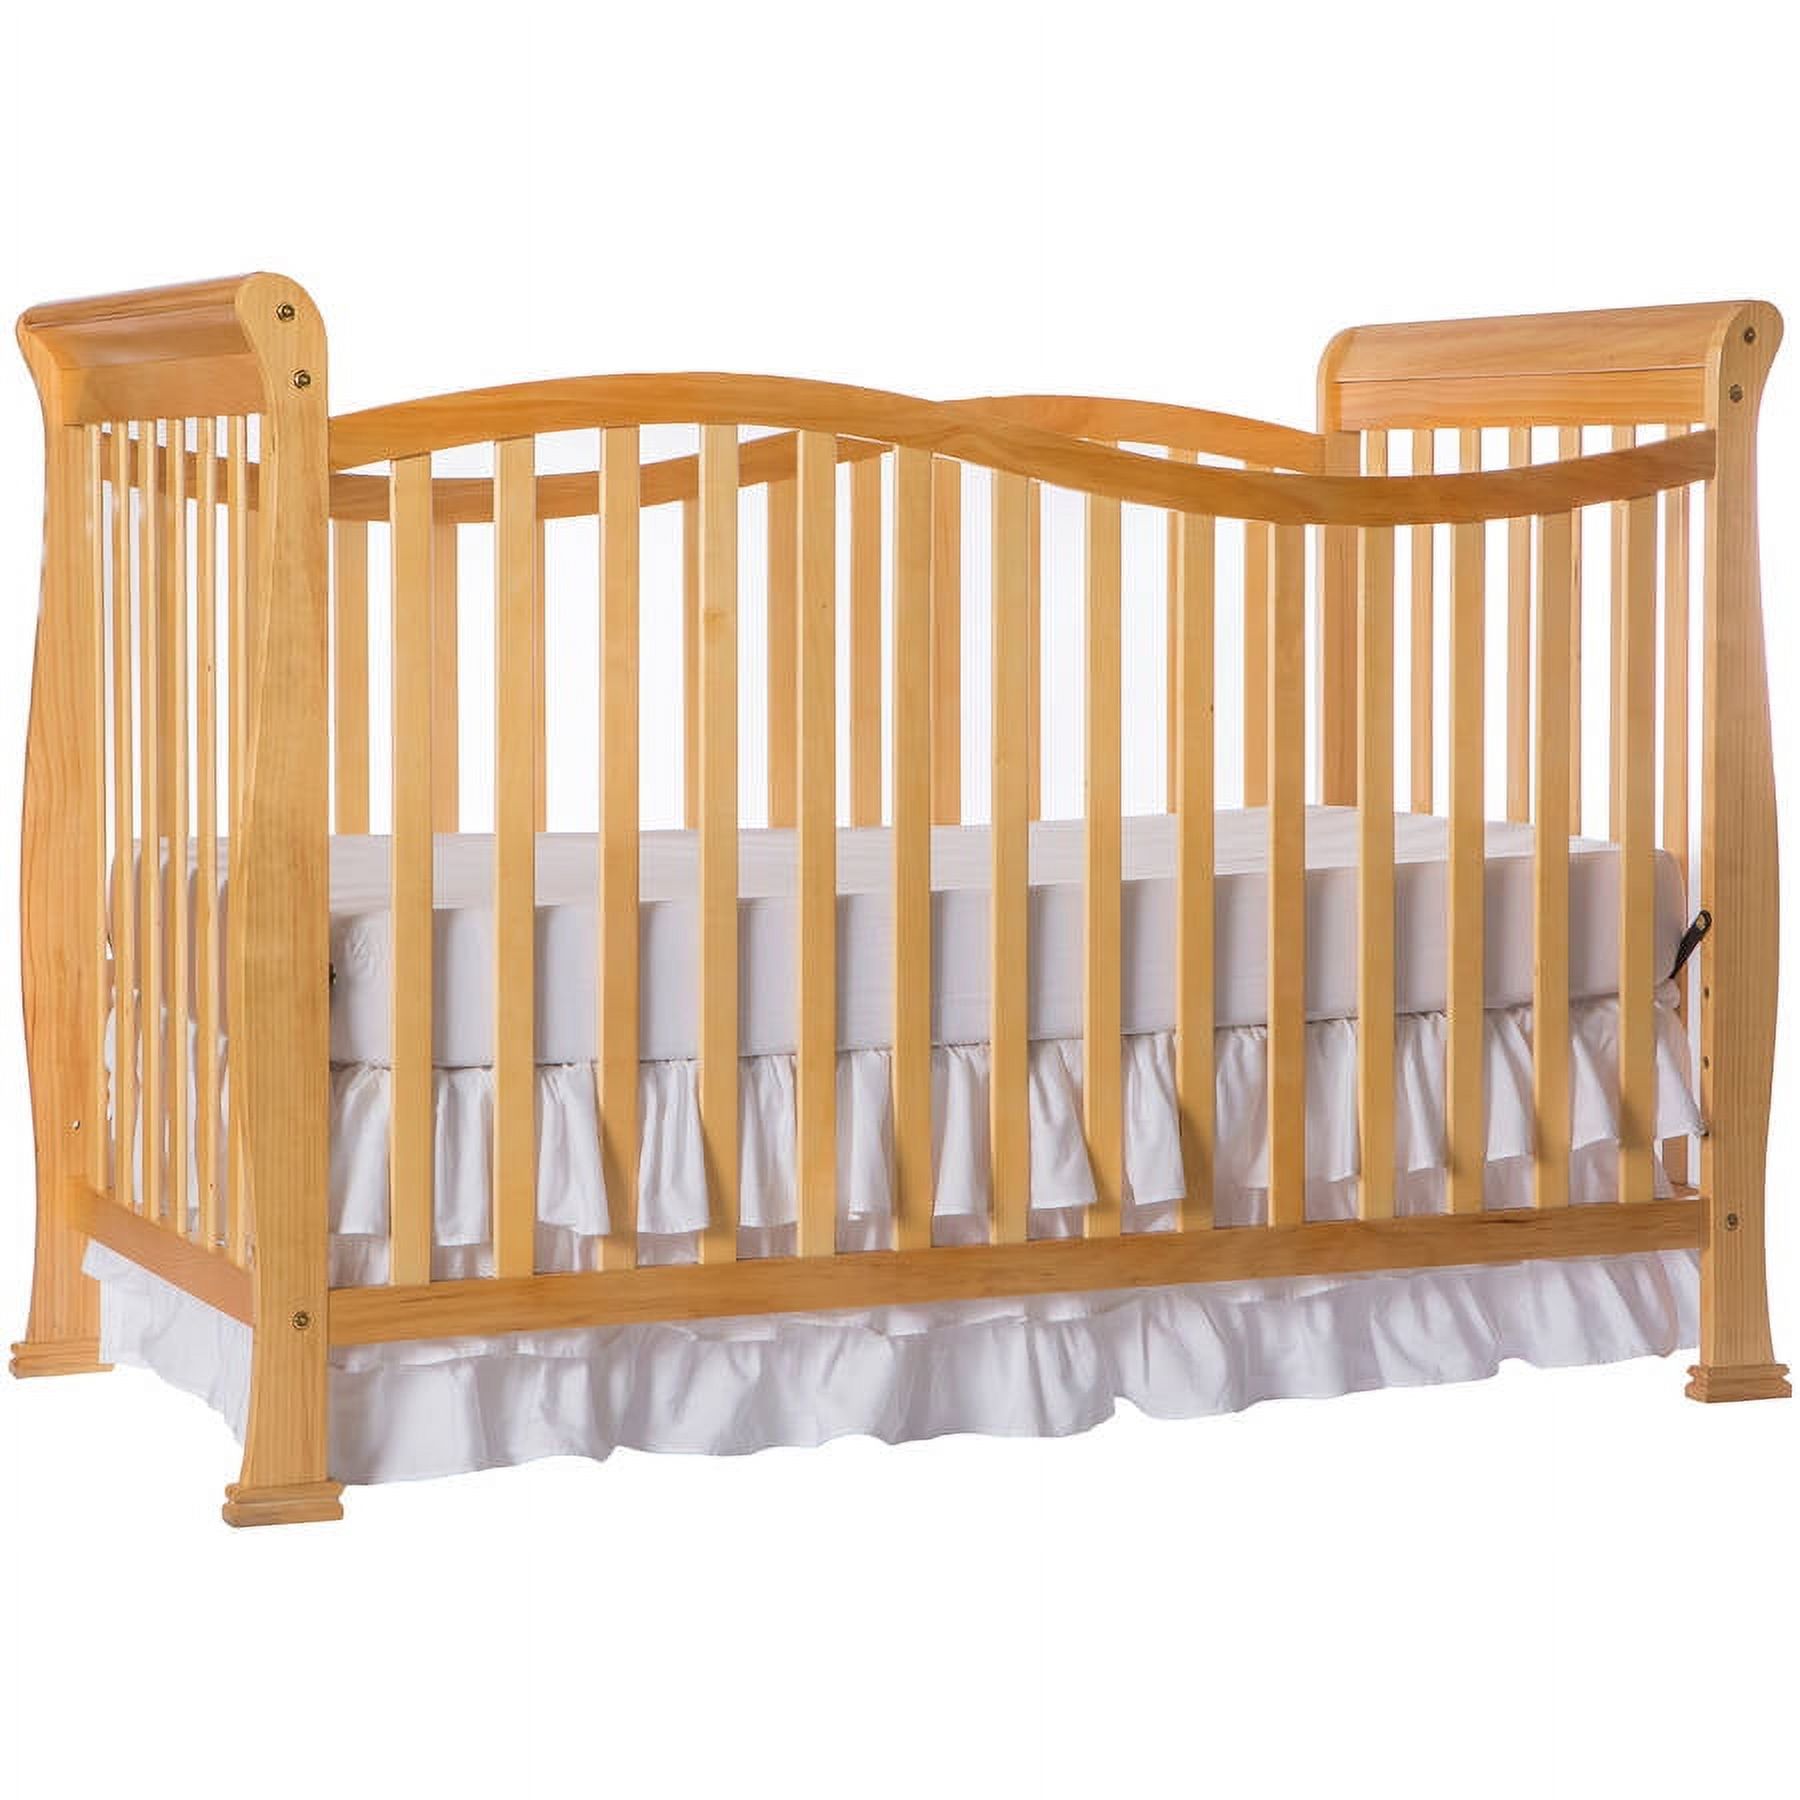 Dream On Me Violet 7-in-1 Convertible Life Style Crib, Natural - image 1 of 11